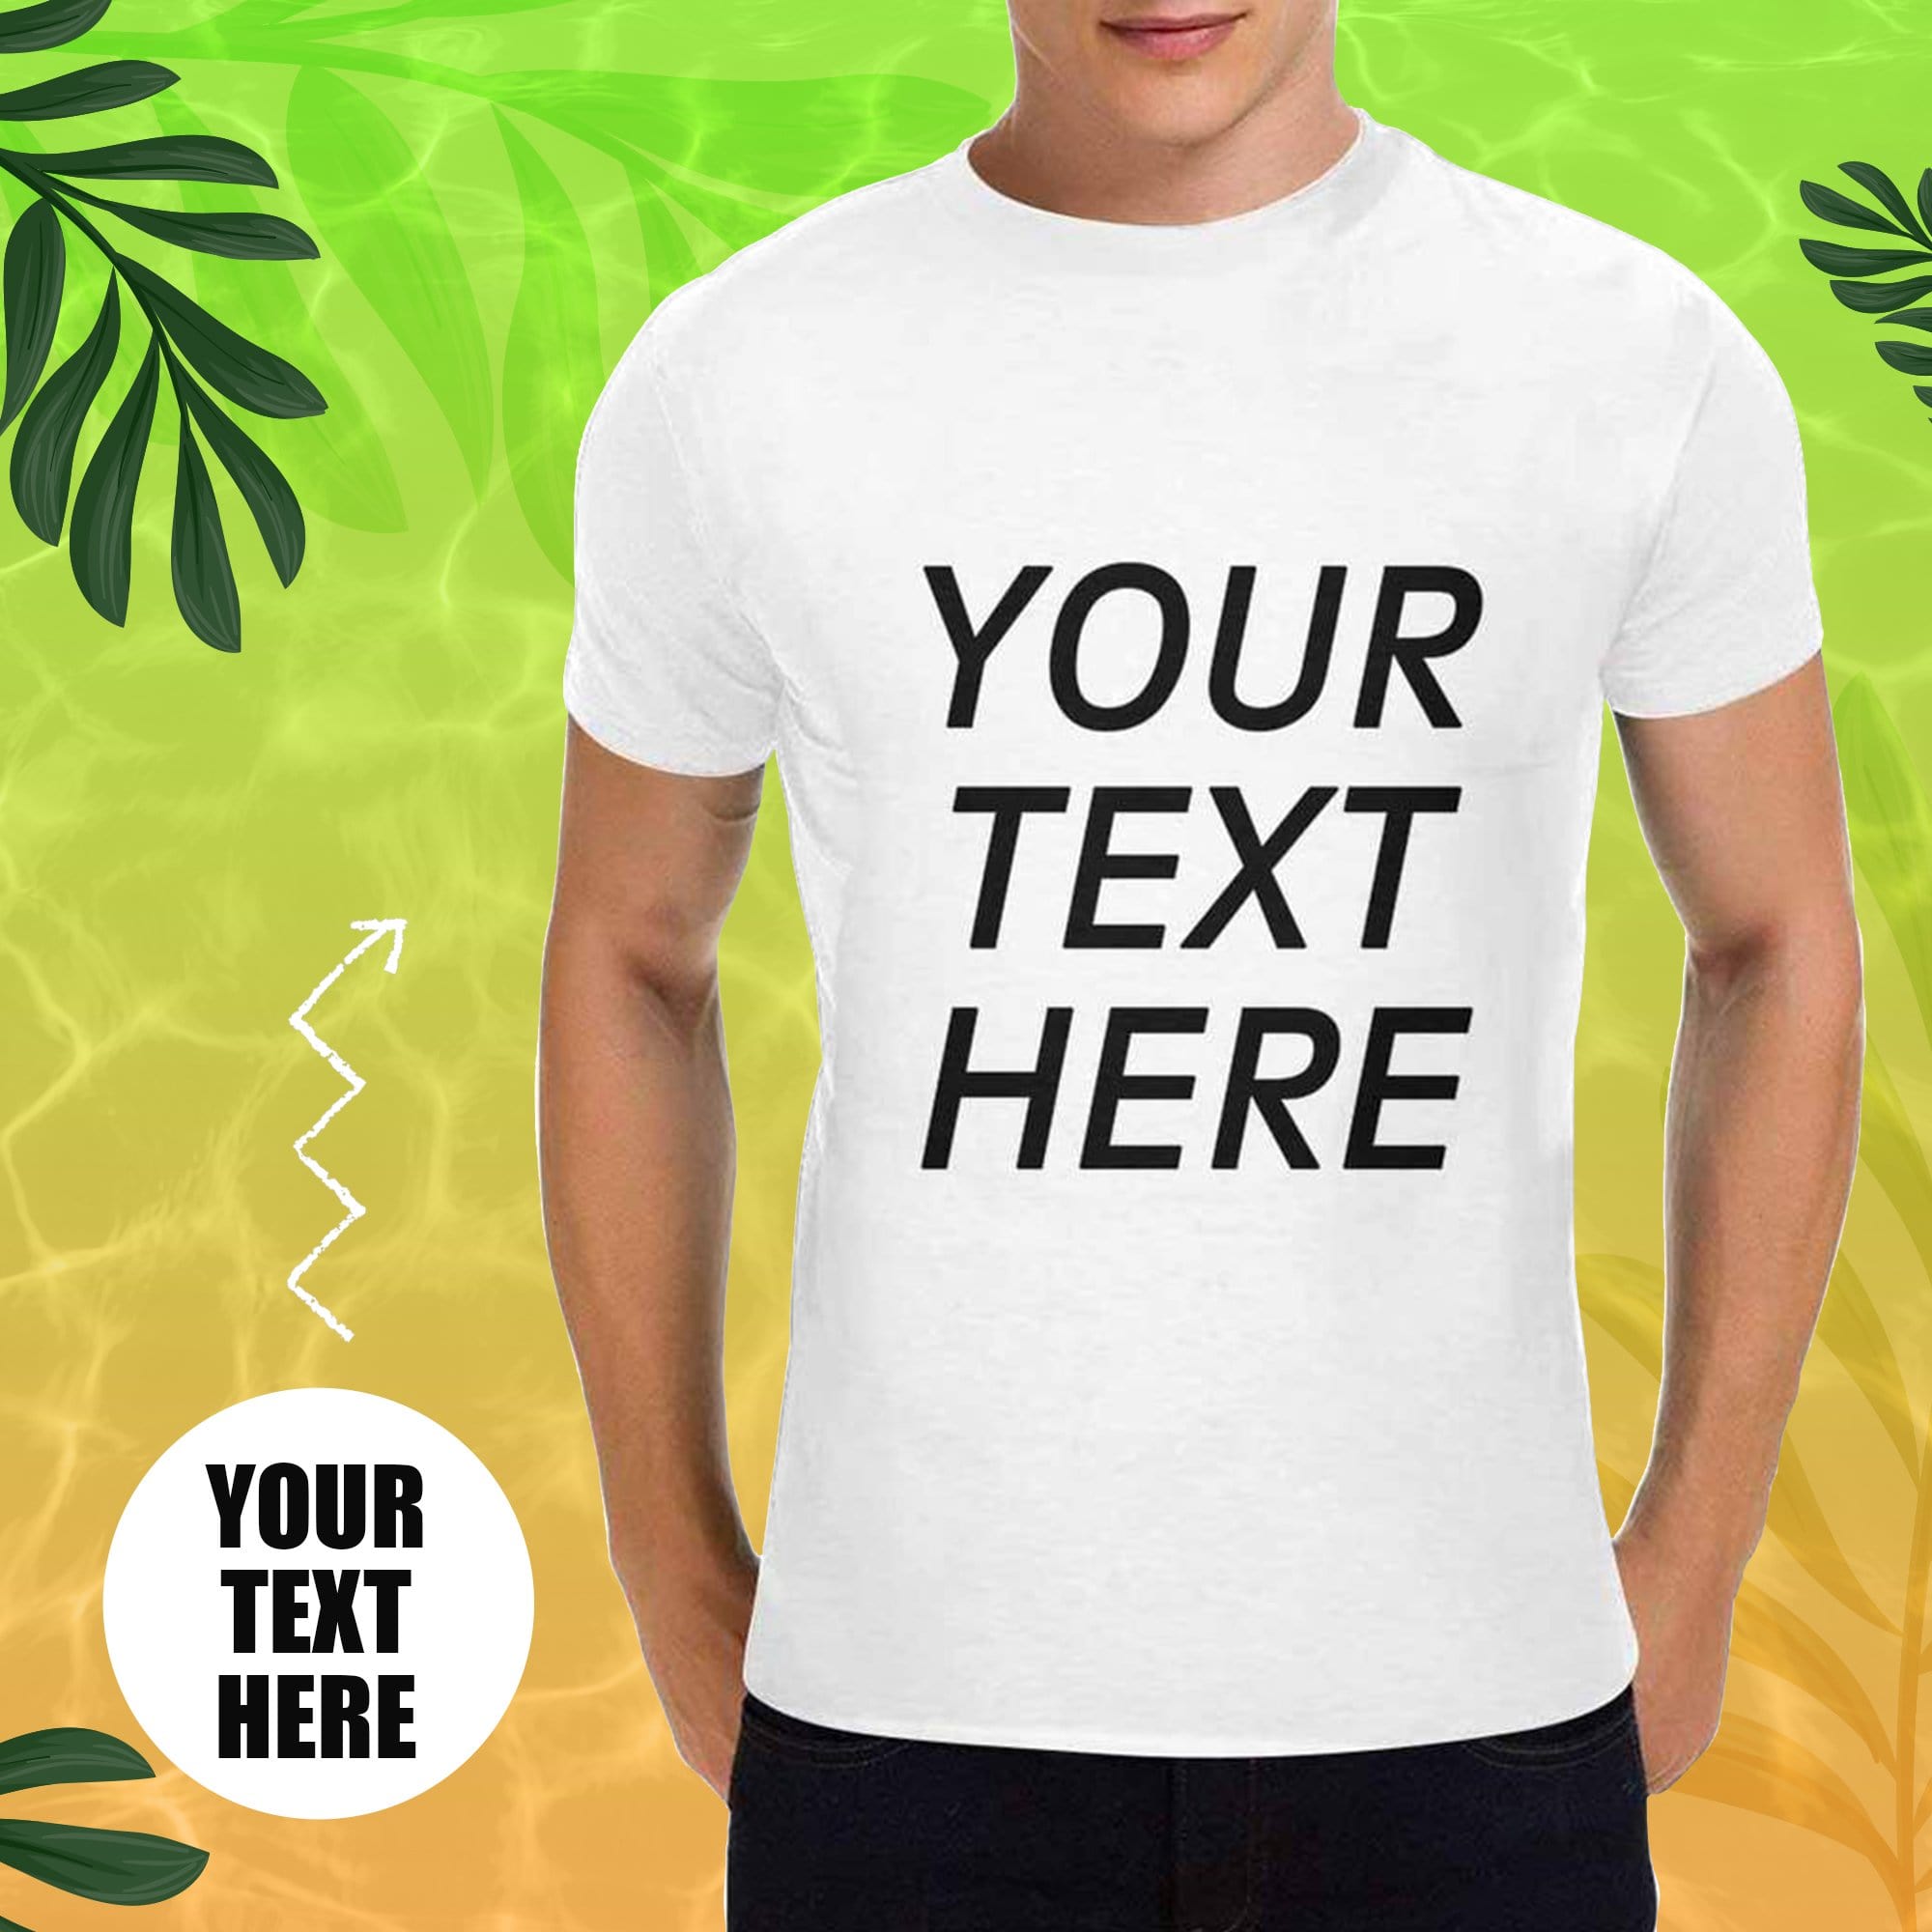 3-Men&#39;s T-shirts With Text